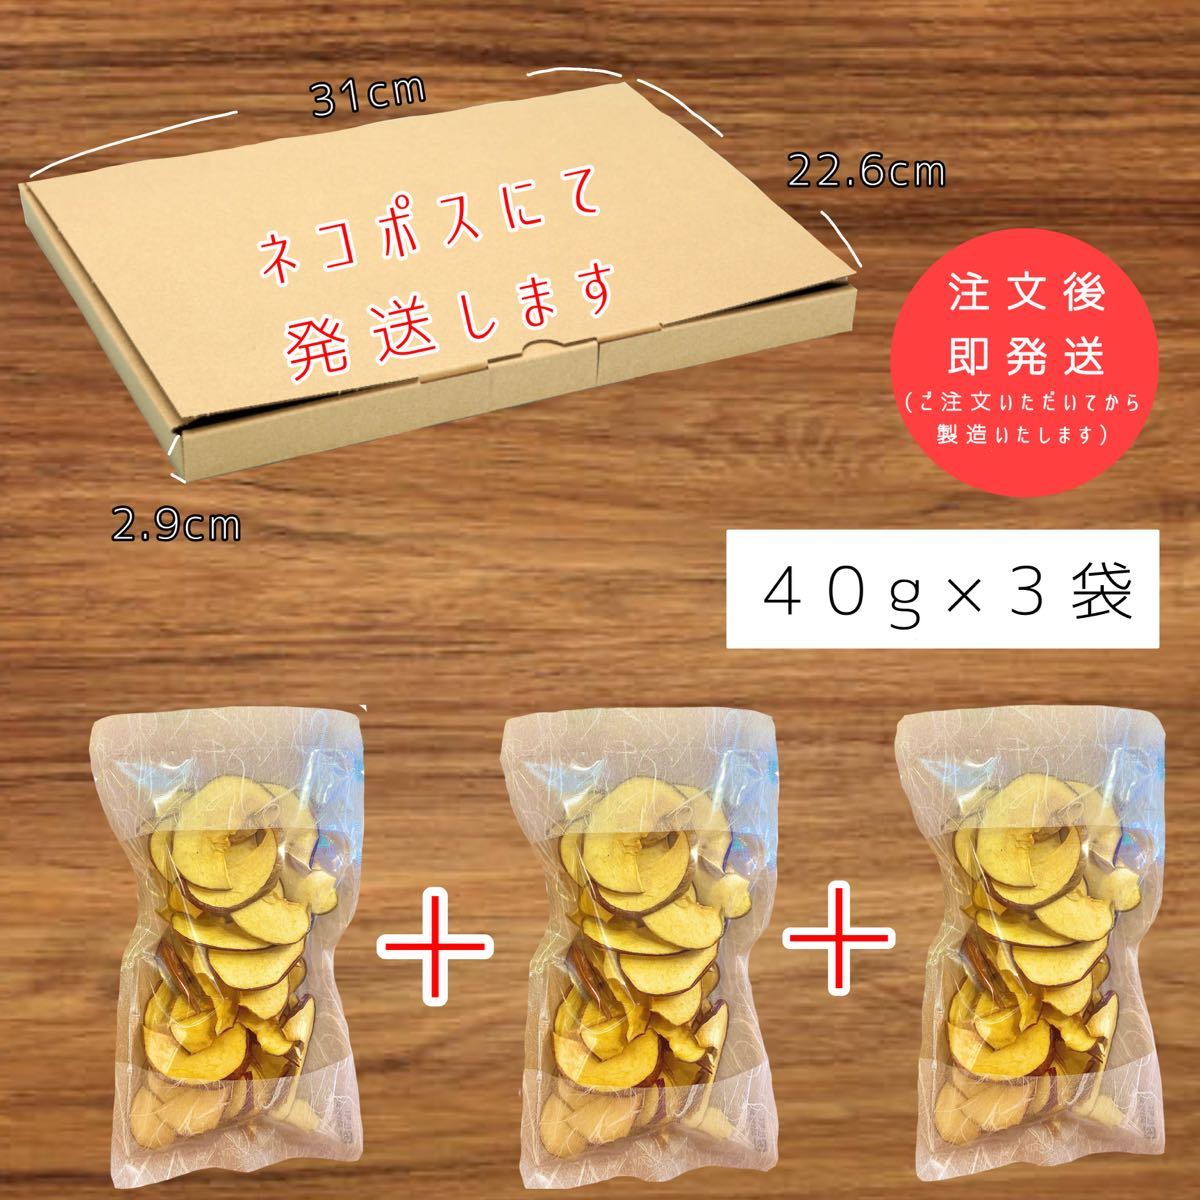 [3 sack ] Aomori prefecture production apple chip s sun ..120g no addition dried fruit dry apple apple chip s sugar un- use sweets confection 